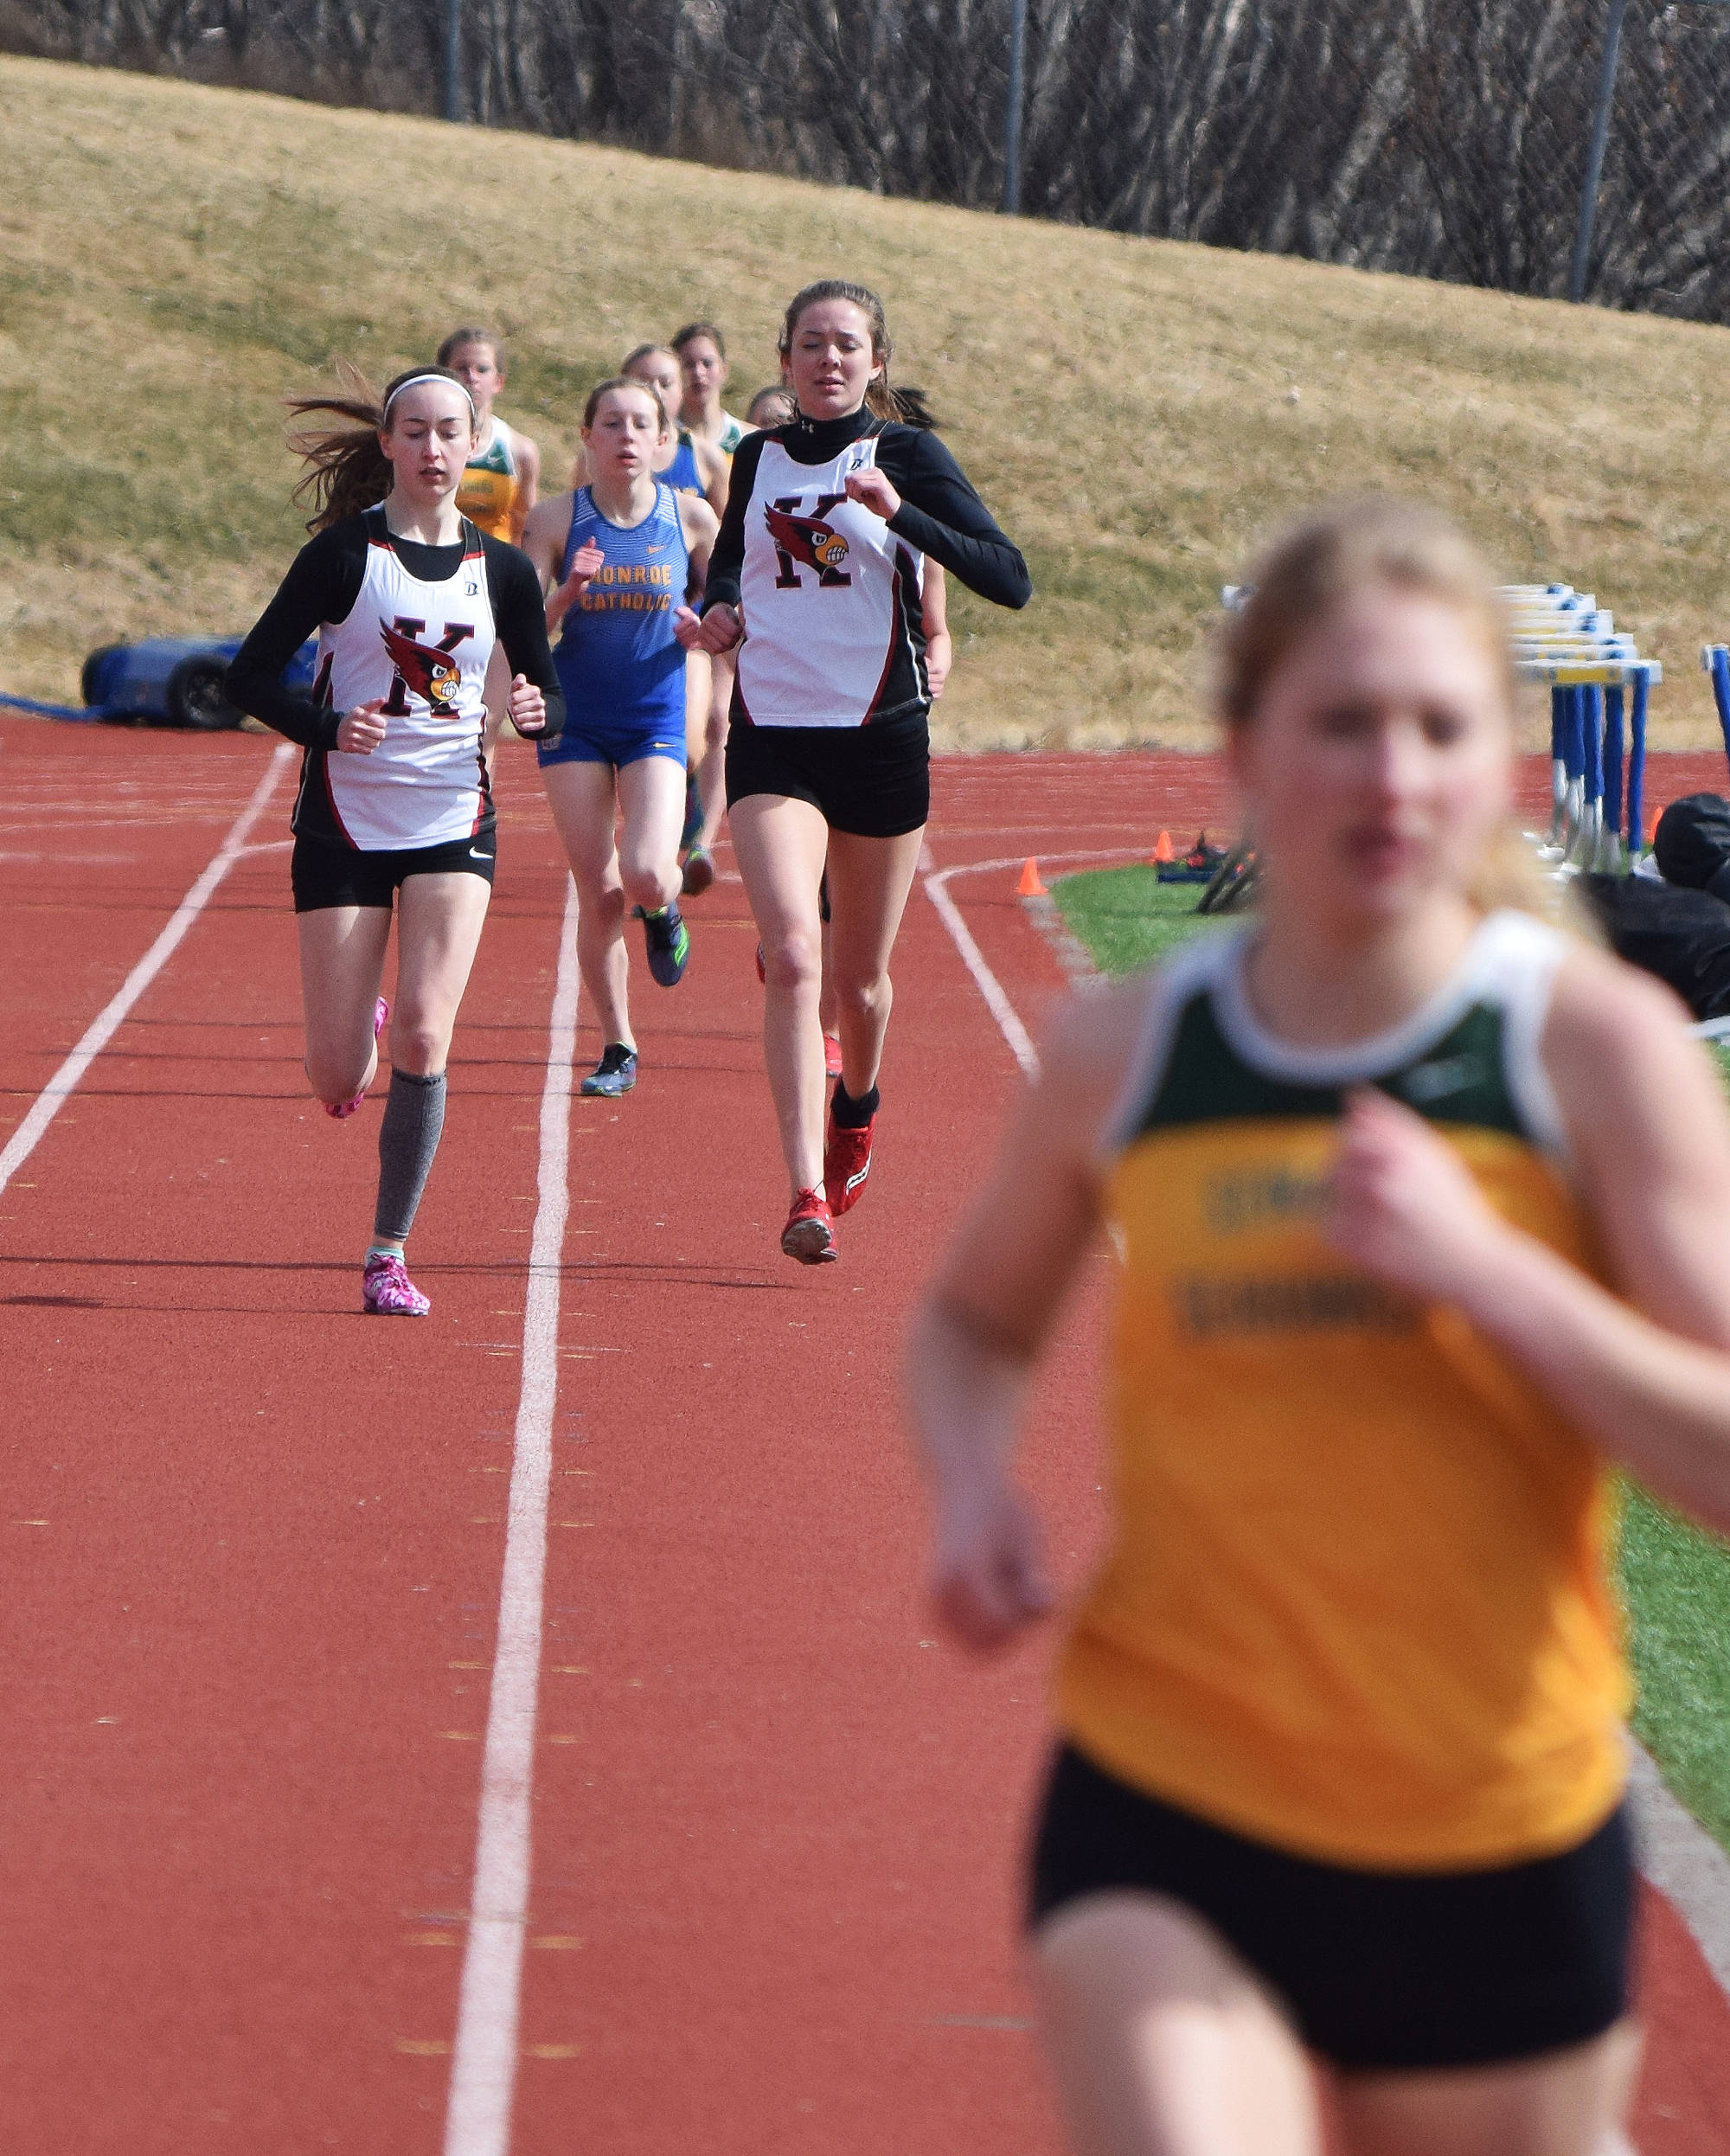 Kenai Central teammates Jaycie Calvert (left) and Brooke Satathite trail race leader Ruby Lindquist of Seward in the girls 1,600 meters Saturday afternoon at Homer High School. (Photo by Joey Klecka/Peninsula Clarion)